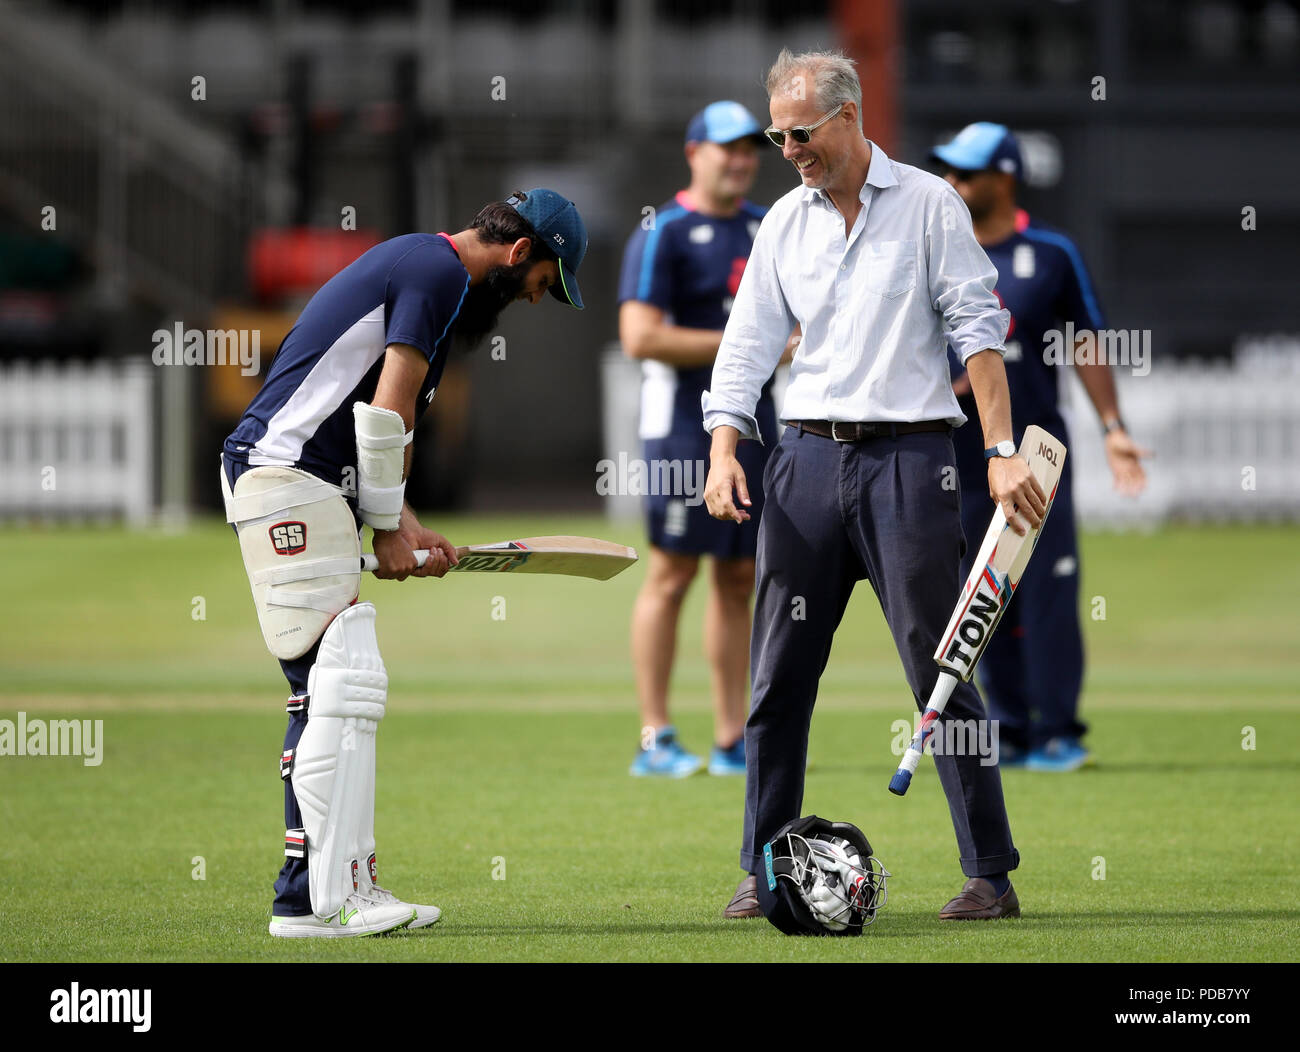 England national team selector Ed Smith (right) and Moeen Ali during the nets session at Lord's, London. PRESS ASSOCIATION Photo. Picture date: Wednesday August 8, 2018. See PA story CRICKET England. Photo credit should read: Tim Goode/PA Wire. Stock Photo